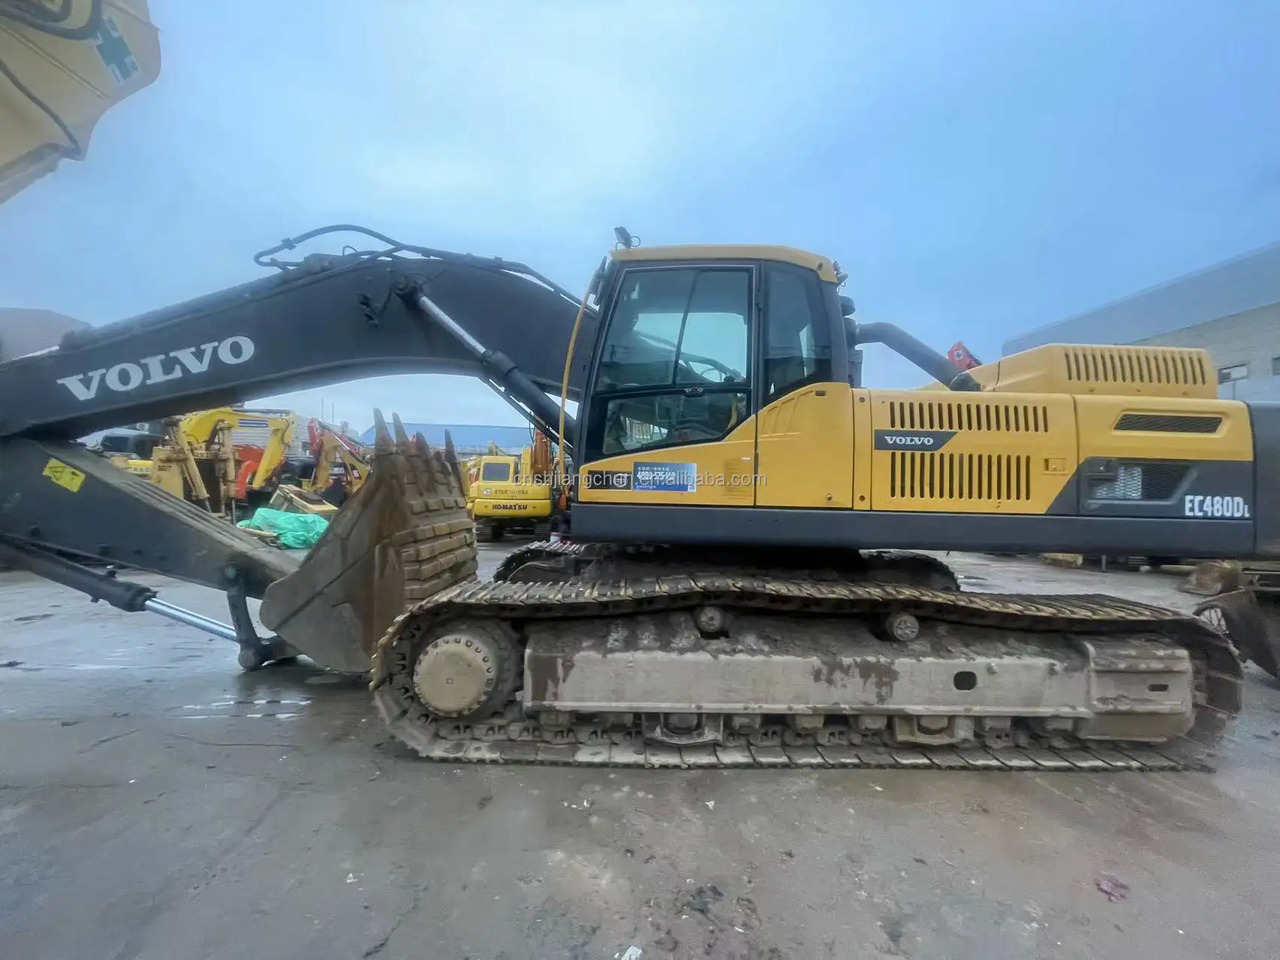 Гусеничный экскаватор second hand  hot selling Excavator construction machinery parts used excavator used  Volvo EC480D  in stock for sale: фото 6